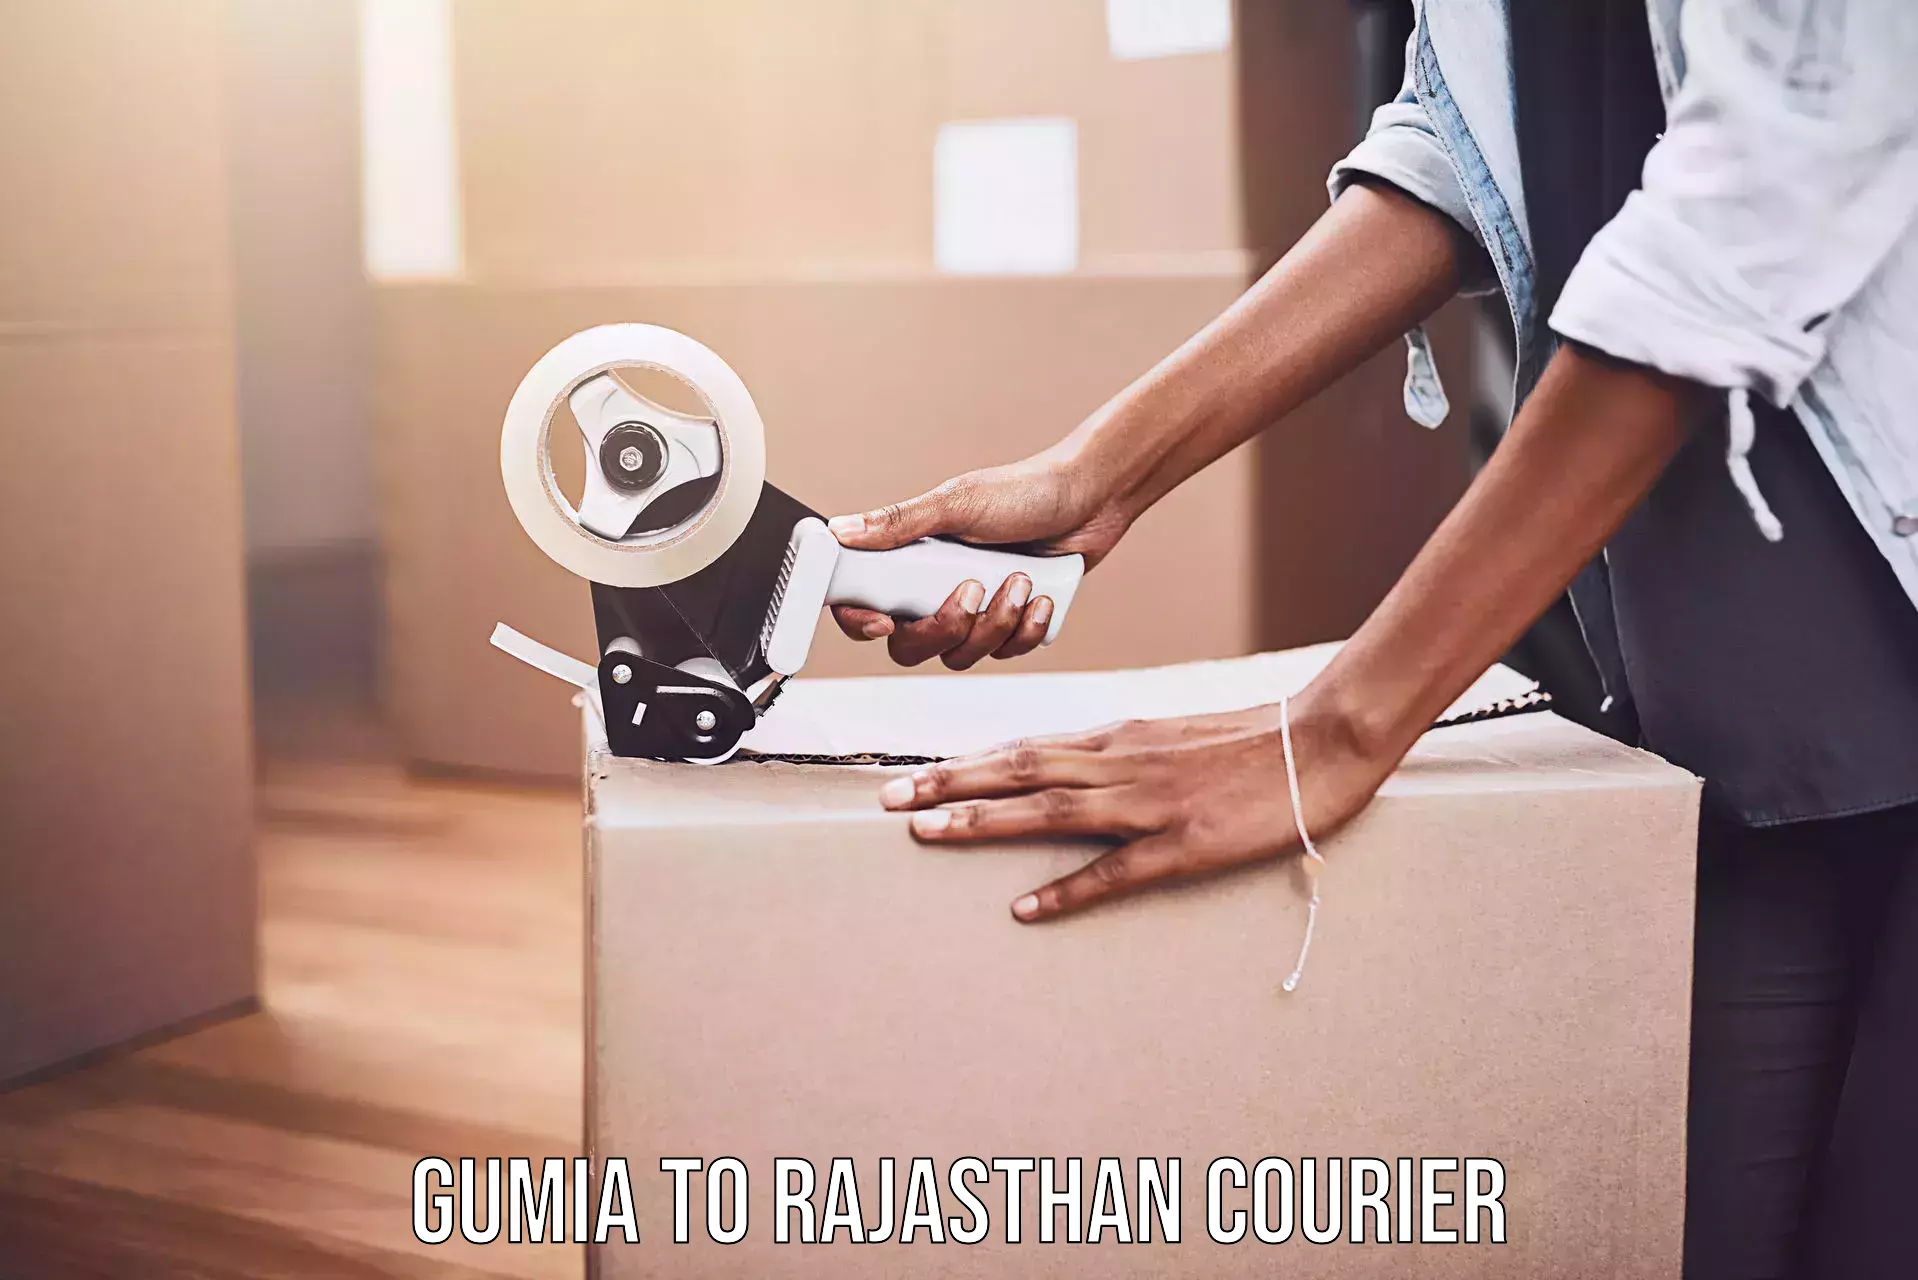 Express logistics service in Gumia to Banar